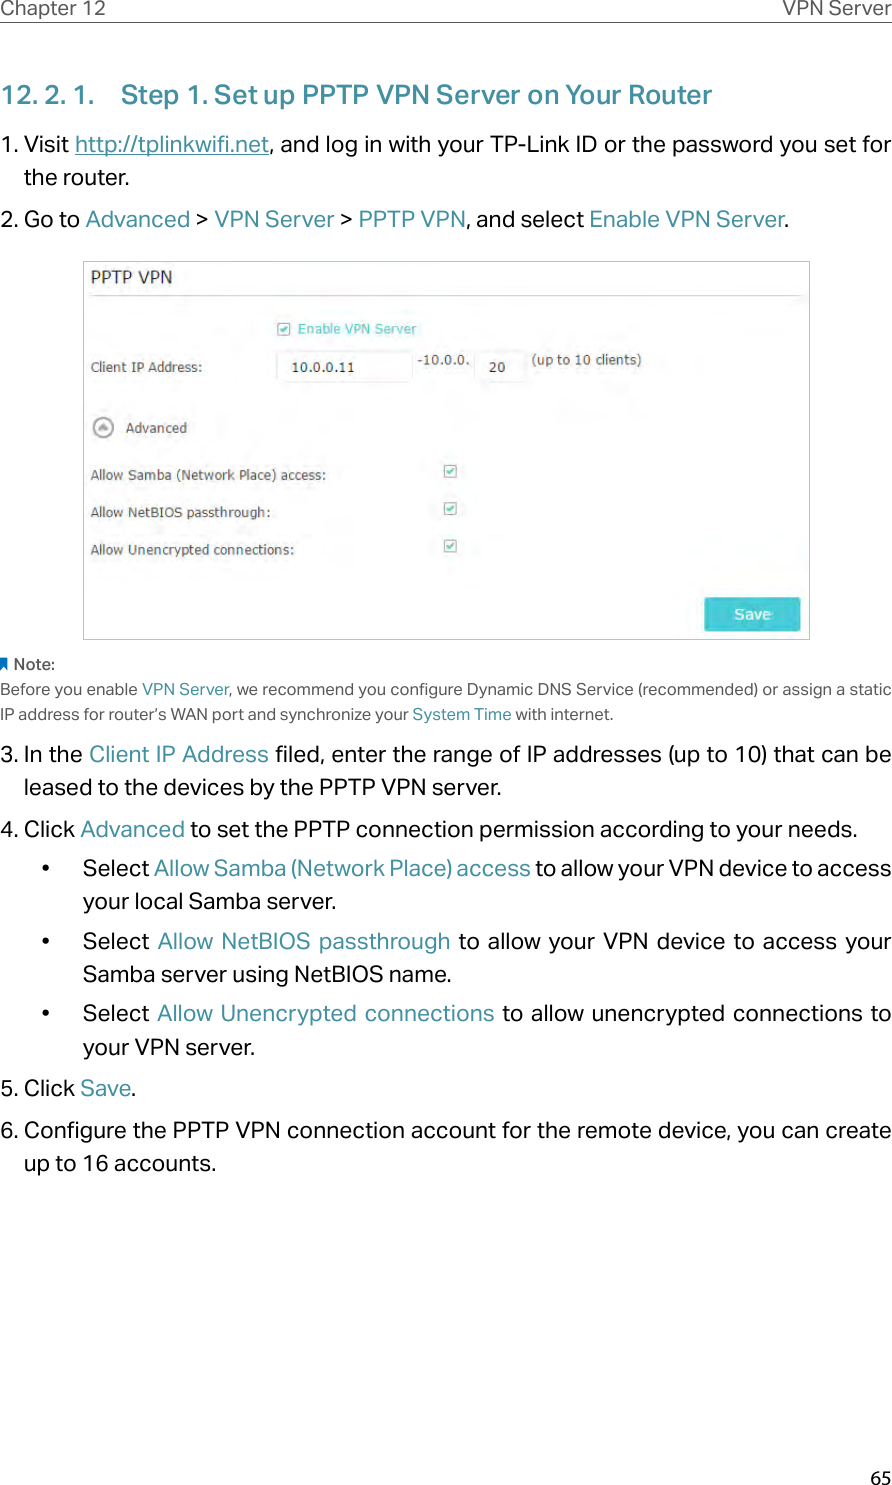 65Chapter 12 VPN Server12. 2. 1.  Step 1. Set up PPTP VPN Server on Your Router1. Visit http://tplinkwifi.net, and log in with your TP-Link ID or the password you set for the router.2. Go to Advanced &gt; VPN Server &gt; PPTP VPN, and select Enable VPN Server.Note:Before you enable VPN Server, we recommend you configure Dynamic DNS Service (recommended) or assign a static IP address for router’s WAN port and synchronize your System Time with internet.3. In the Client IP Address filed, enter the range of IP addresses (up to 10) that can be leased to the devices by the PPTP VPN server.4. Click Advanced to set the PPTP connection permission according to your needs.•  Select Allow Samba (Network Place) access to allow your VPN device to access your local Samba server.•  Select  Allow NetBIOS passthrough to allow your VPN device to access your Samba server using NetBIOS name.•  Select Allow Unencrypted connections to allow unencrypted connections to your VPN server.5. Click Save.6. Configure the PPTP VPN connection account for the remote device, you can create up to 16 accounts.